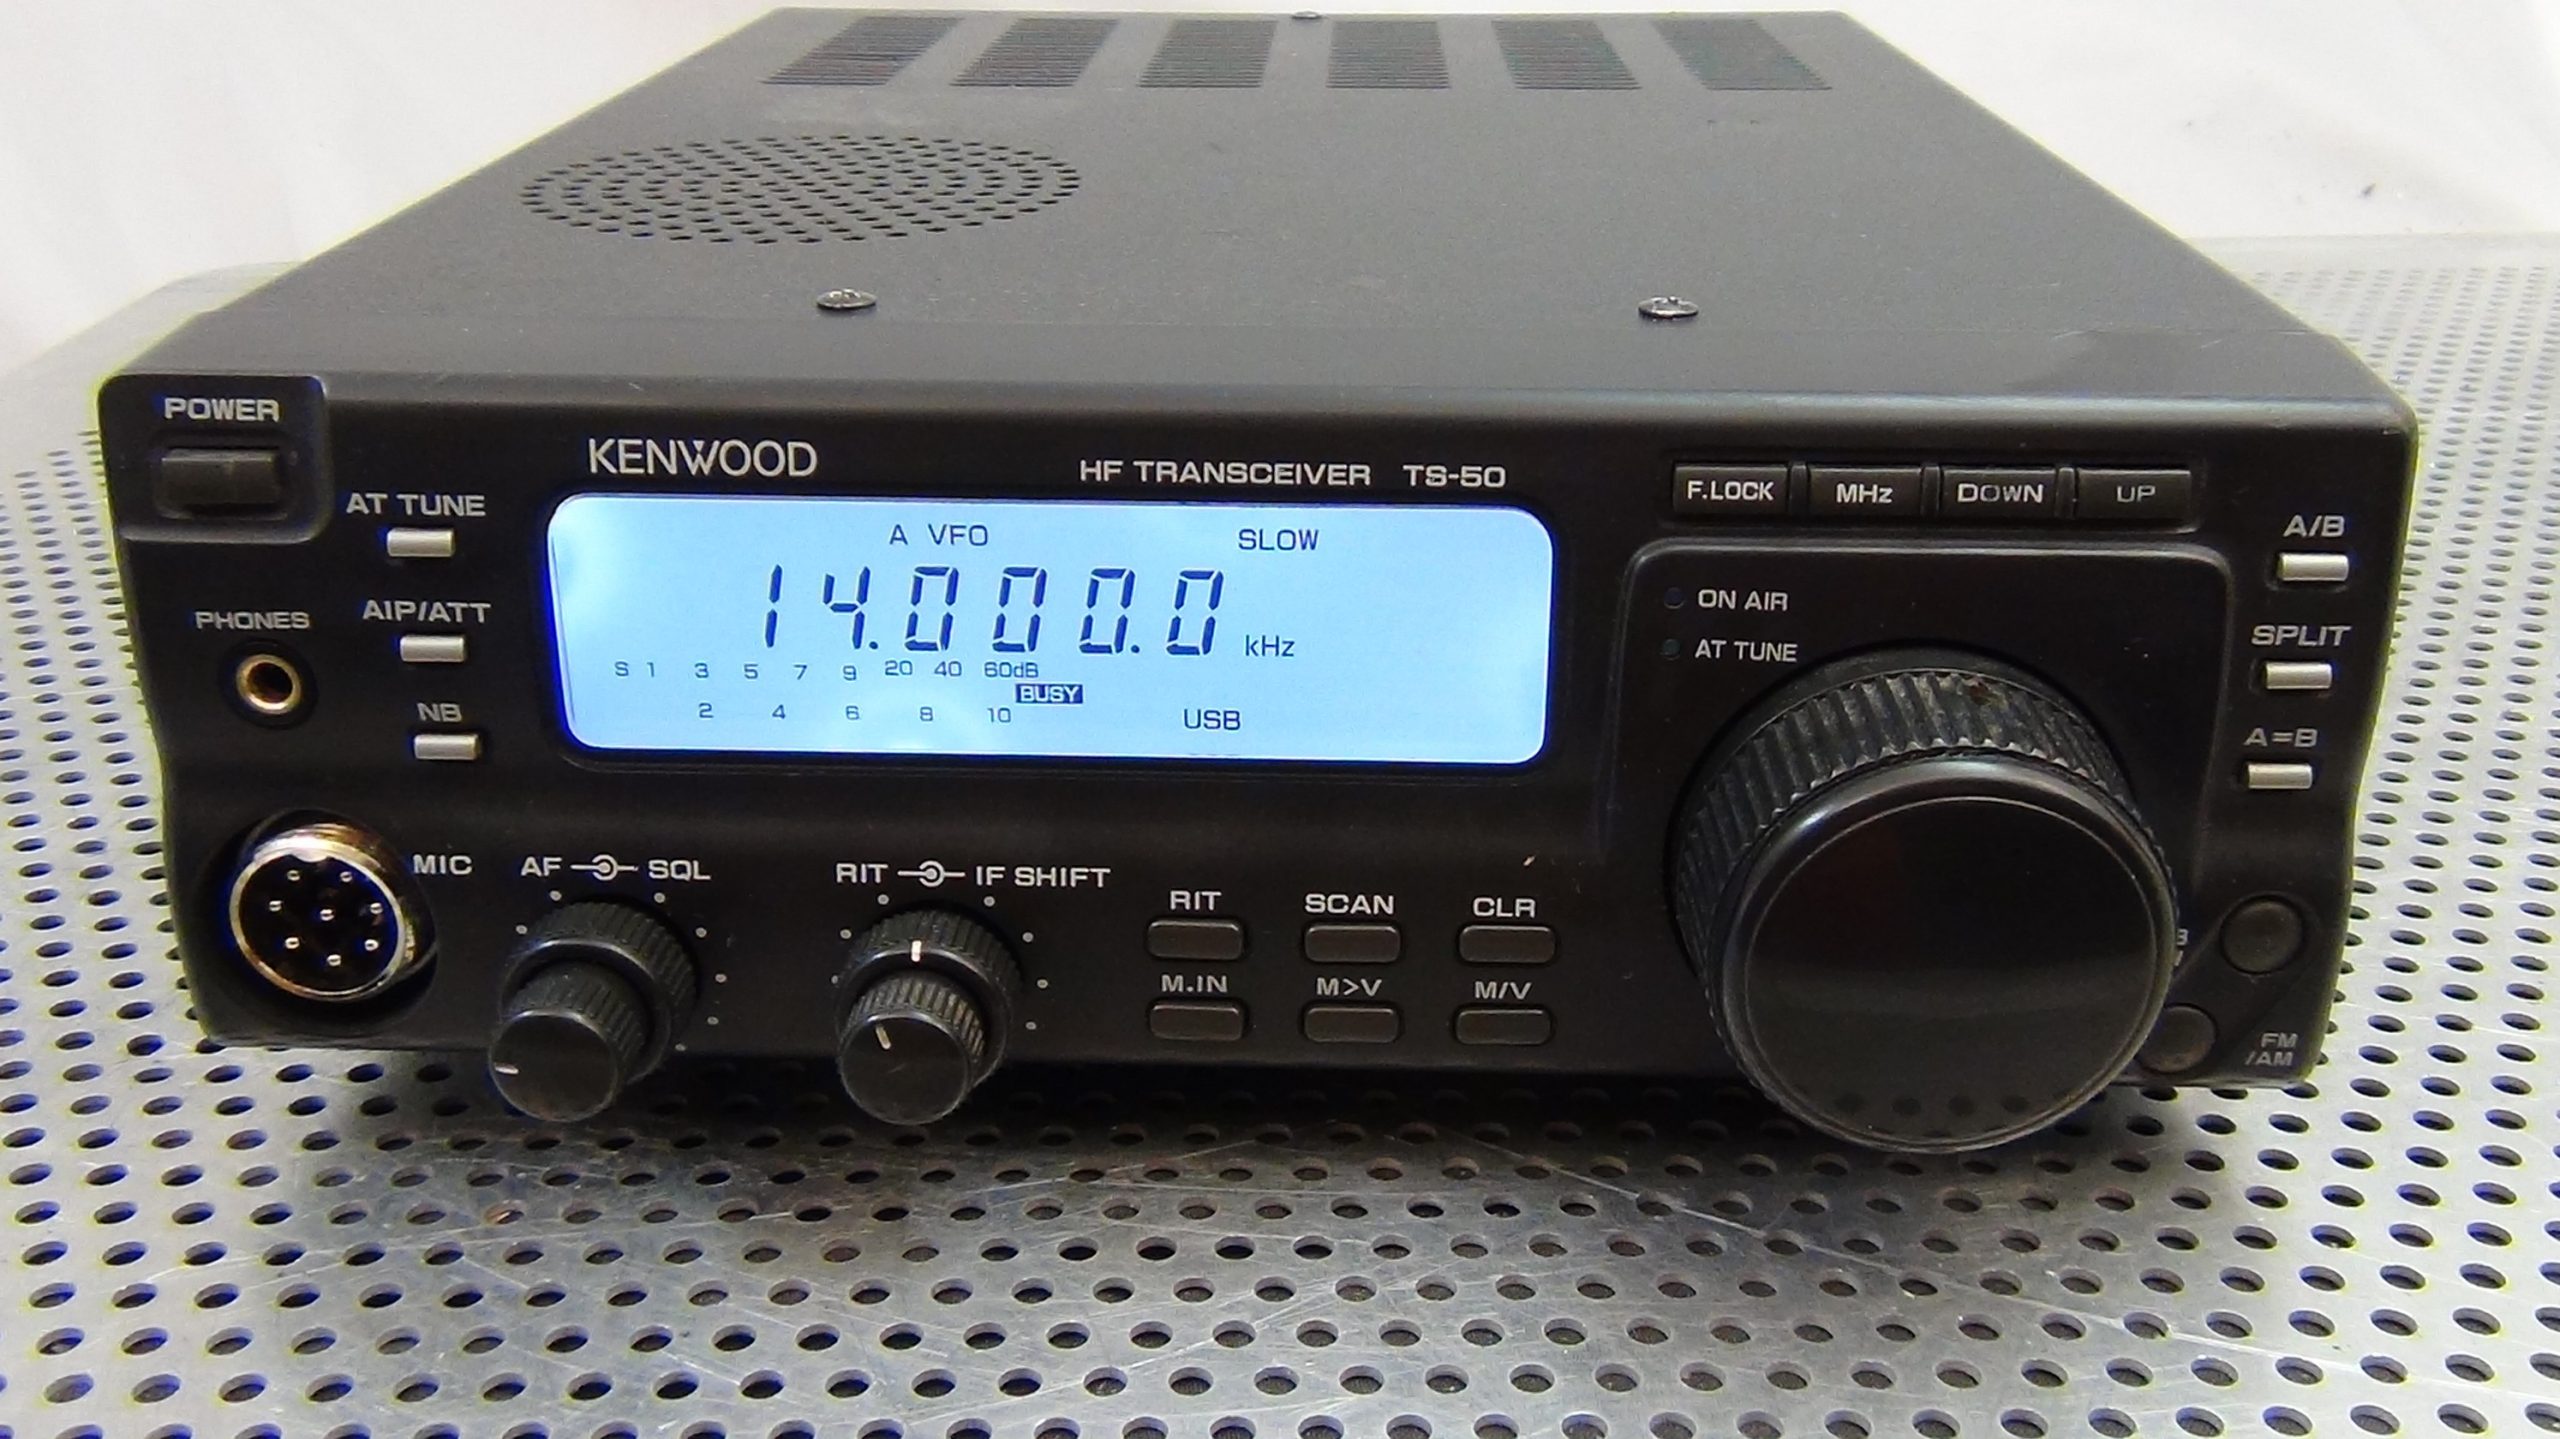 Kenwood TS-50 Transceiver - FREE Shipping in Contiguous USA!